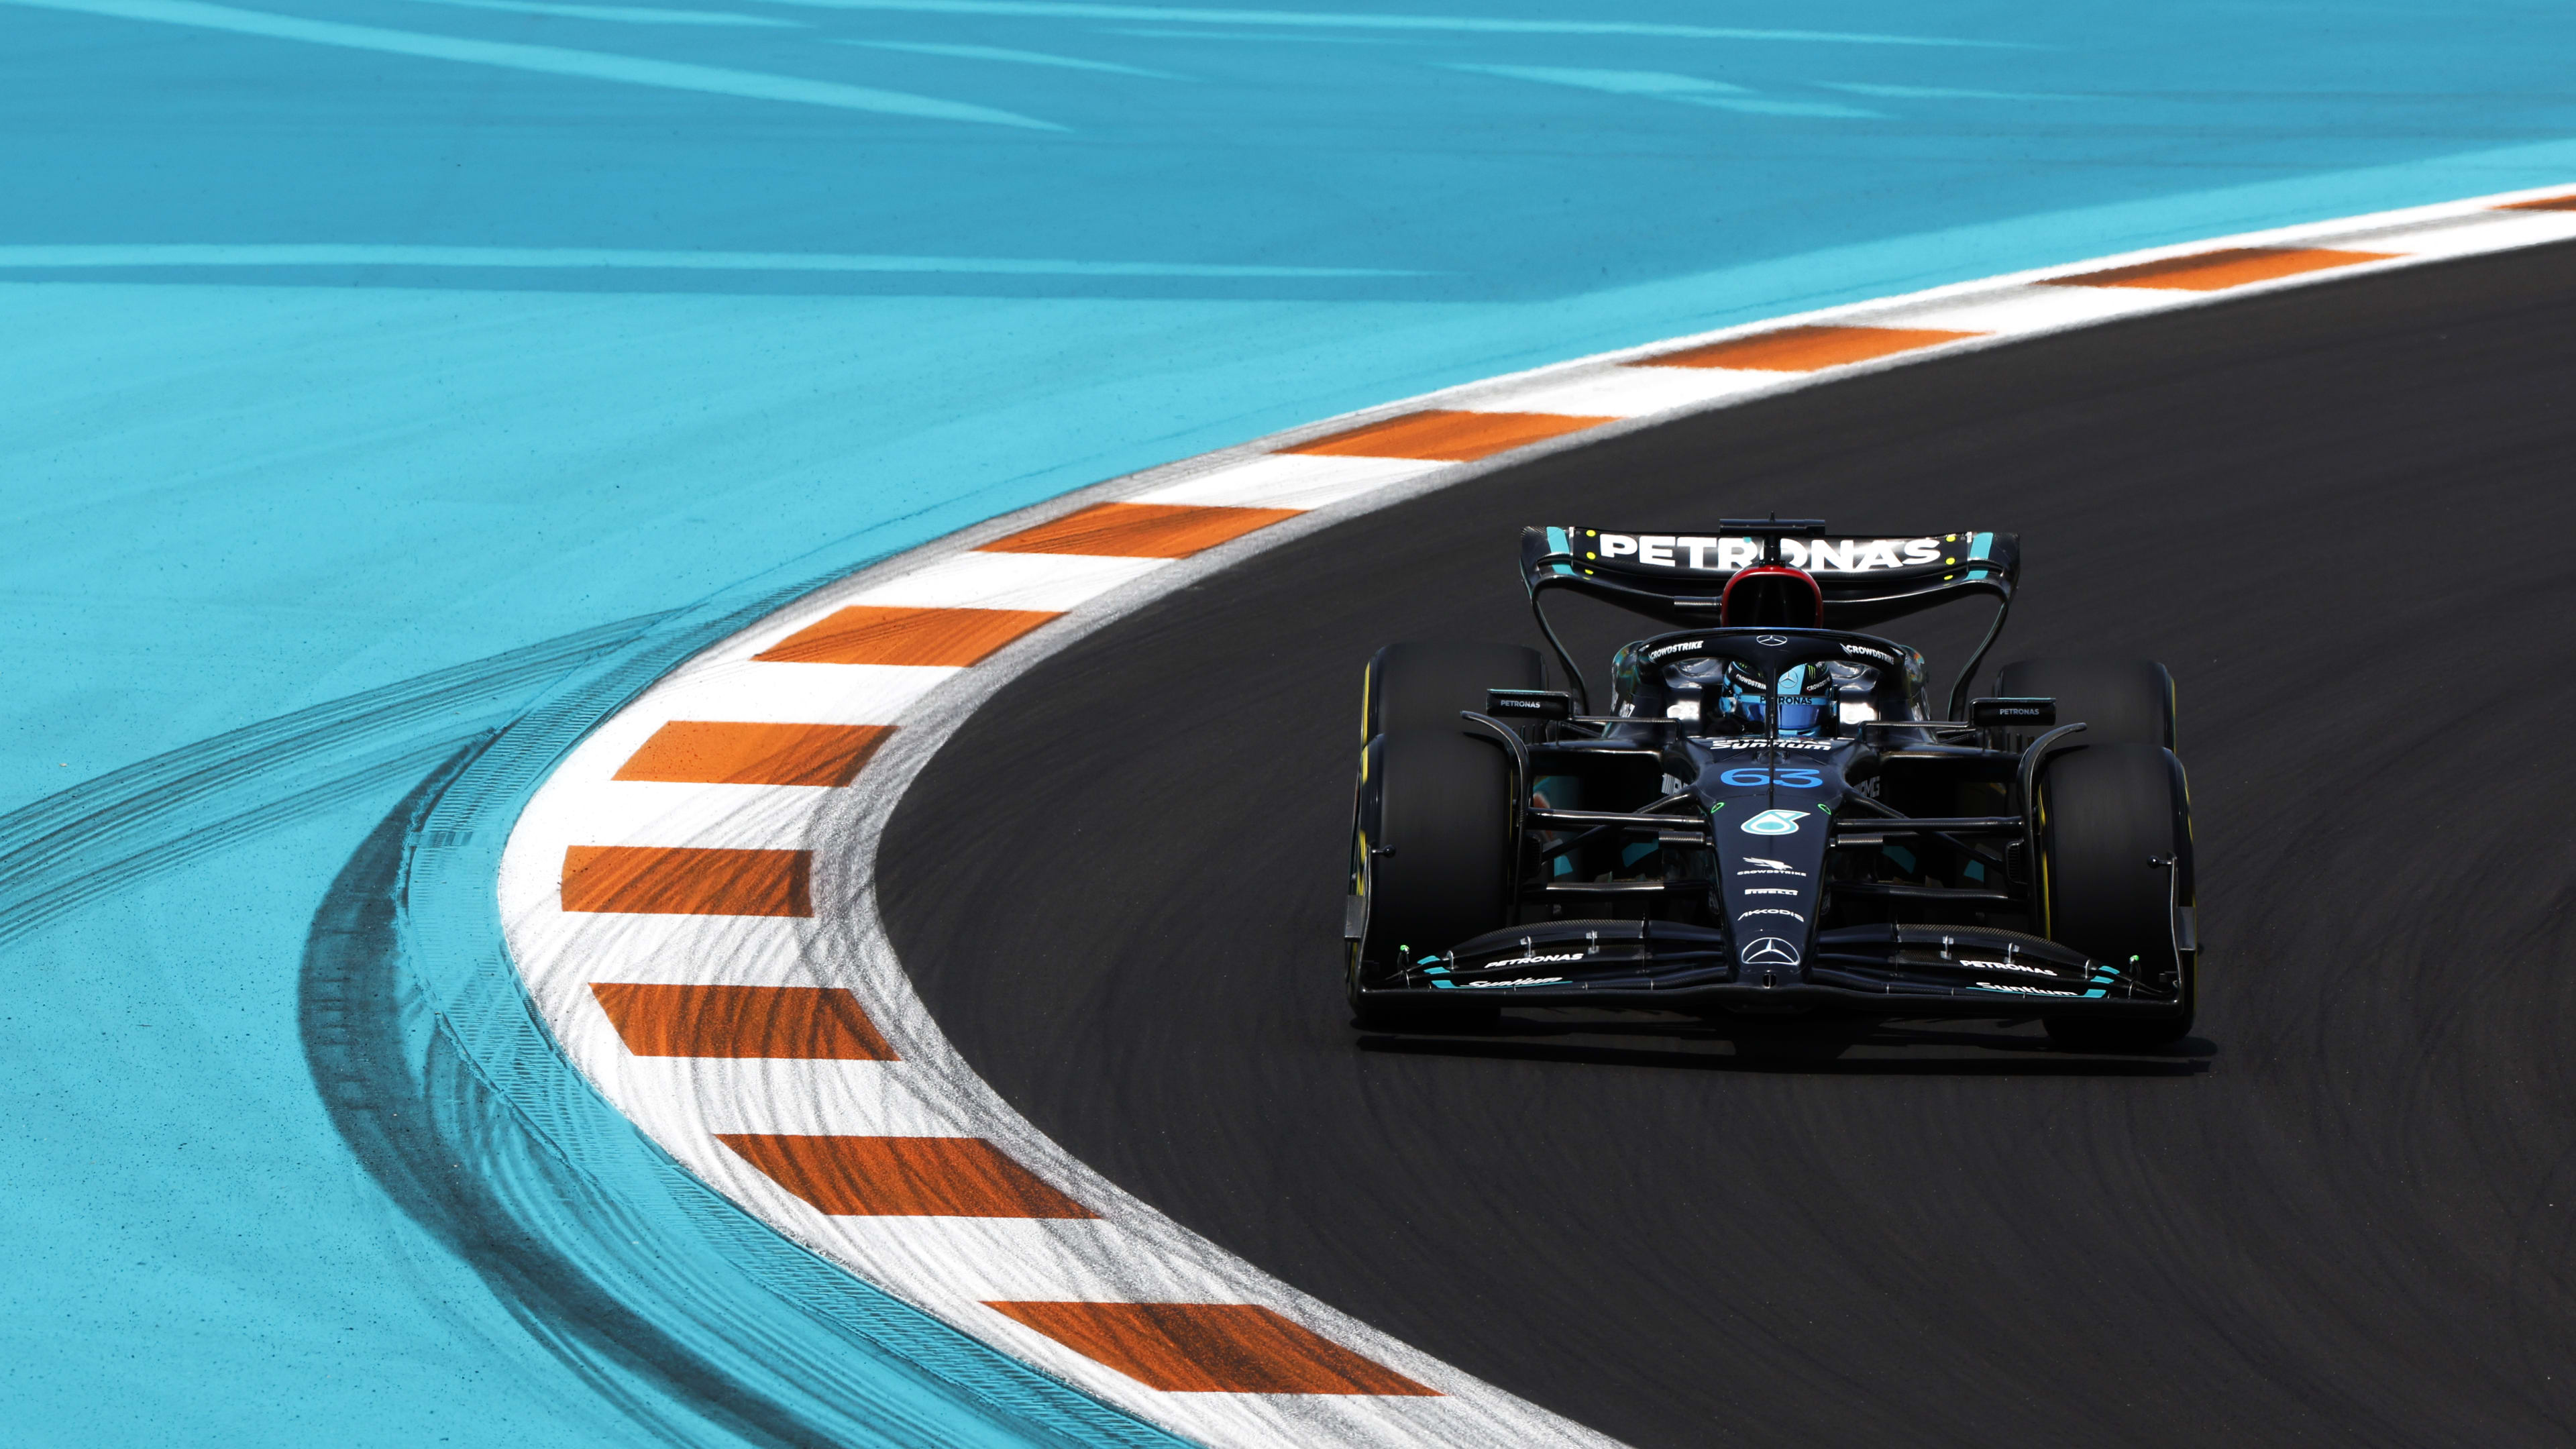 2023 Miami Grand Prix FP1 report and highlights Russell heads Mercedes 1-2 in opening practice session Formula 1®